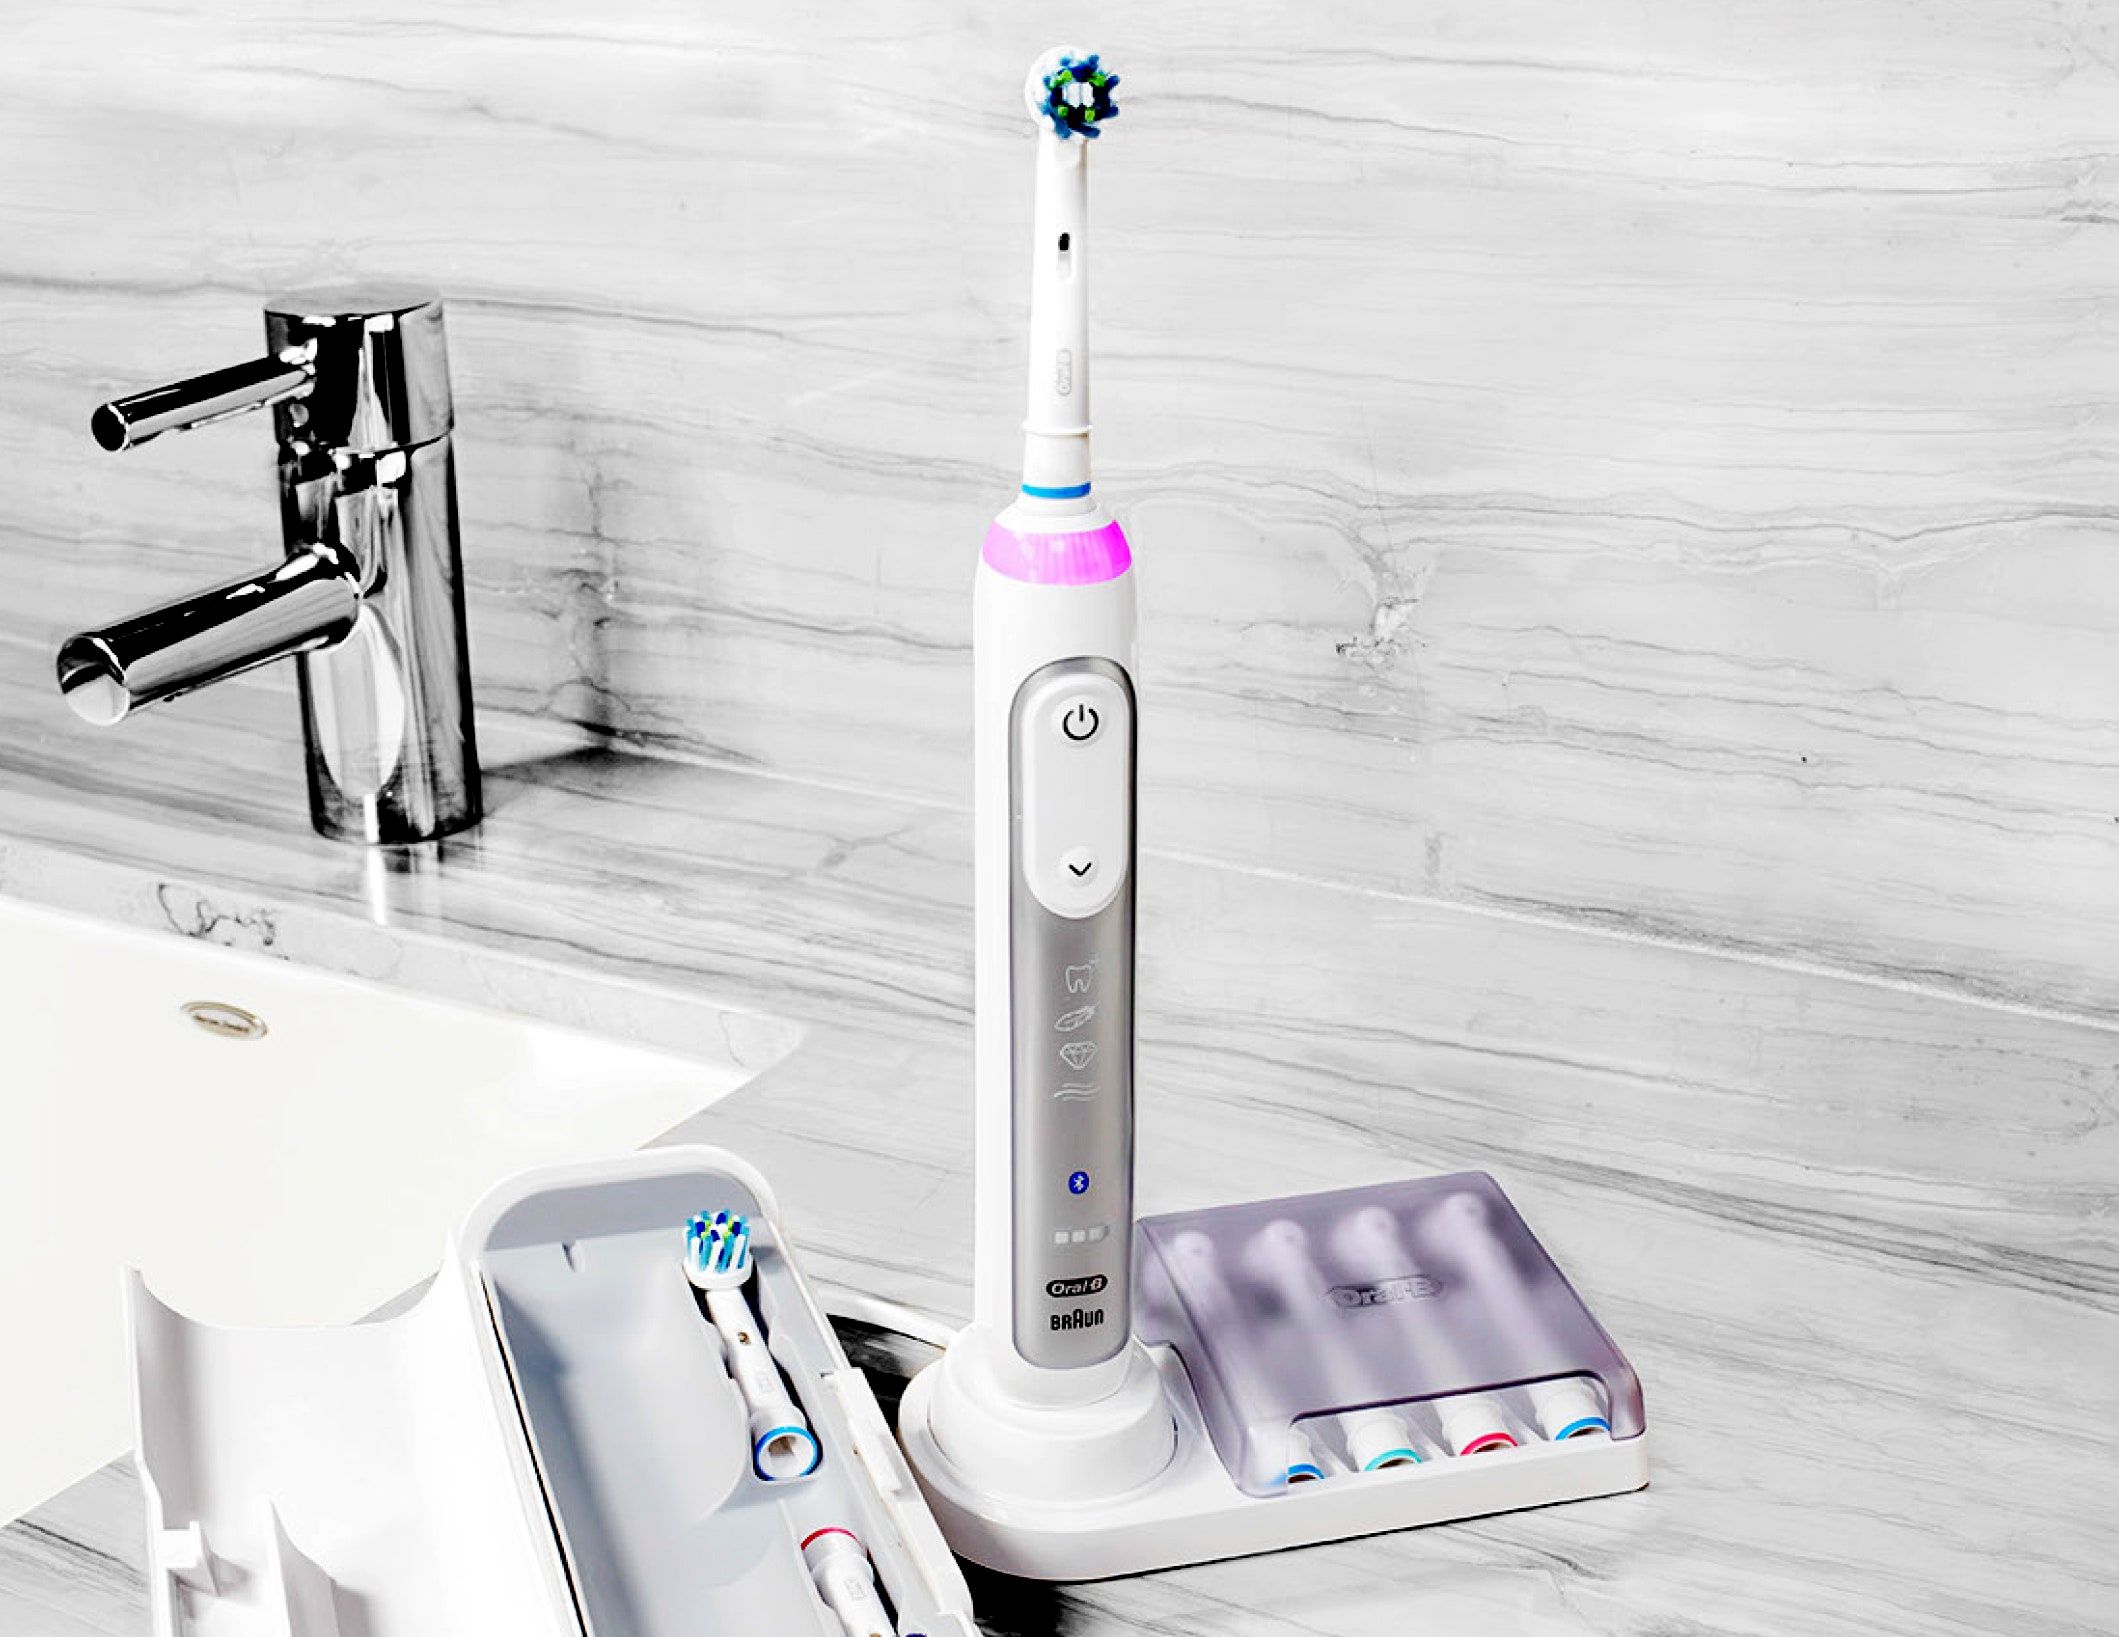 Oral-B Toothbrush: How To Use